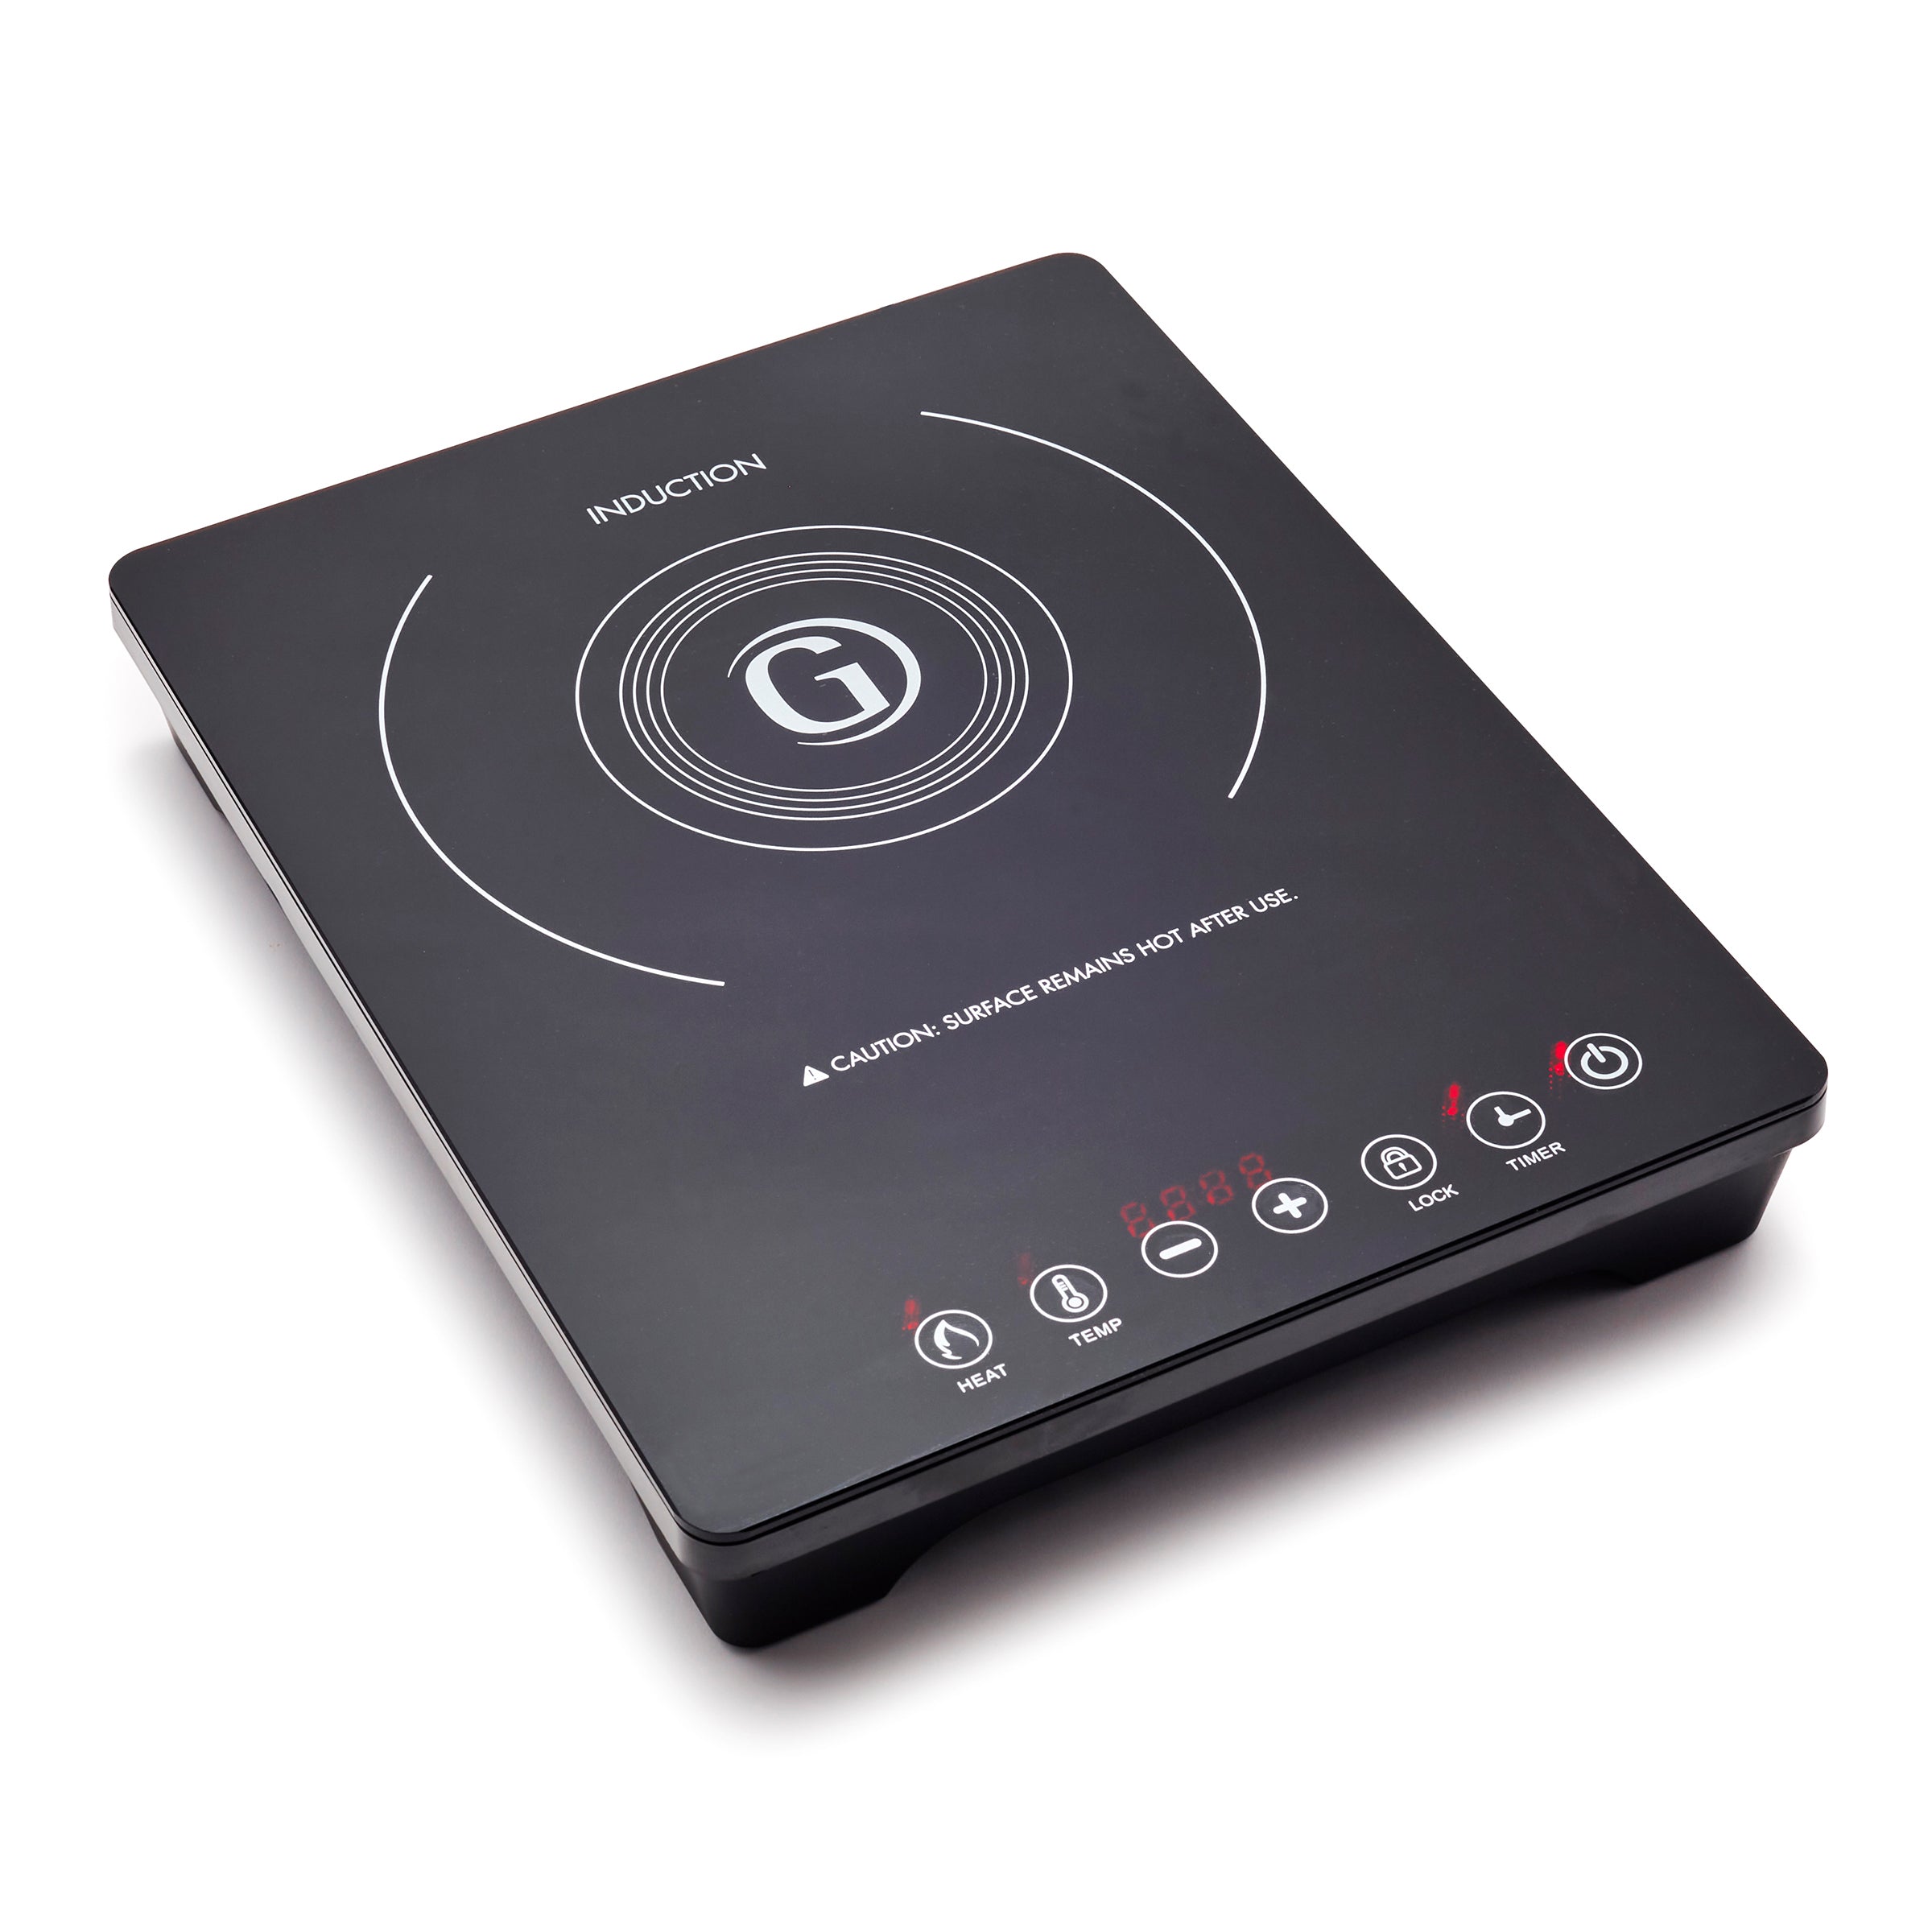 15 Amazing Griddle For Induction Cooktop For 2023